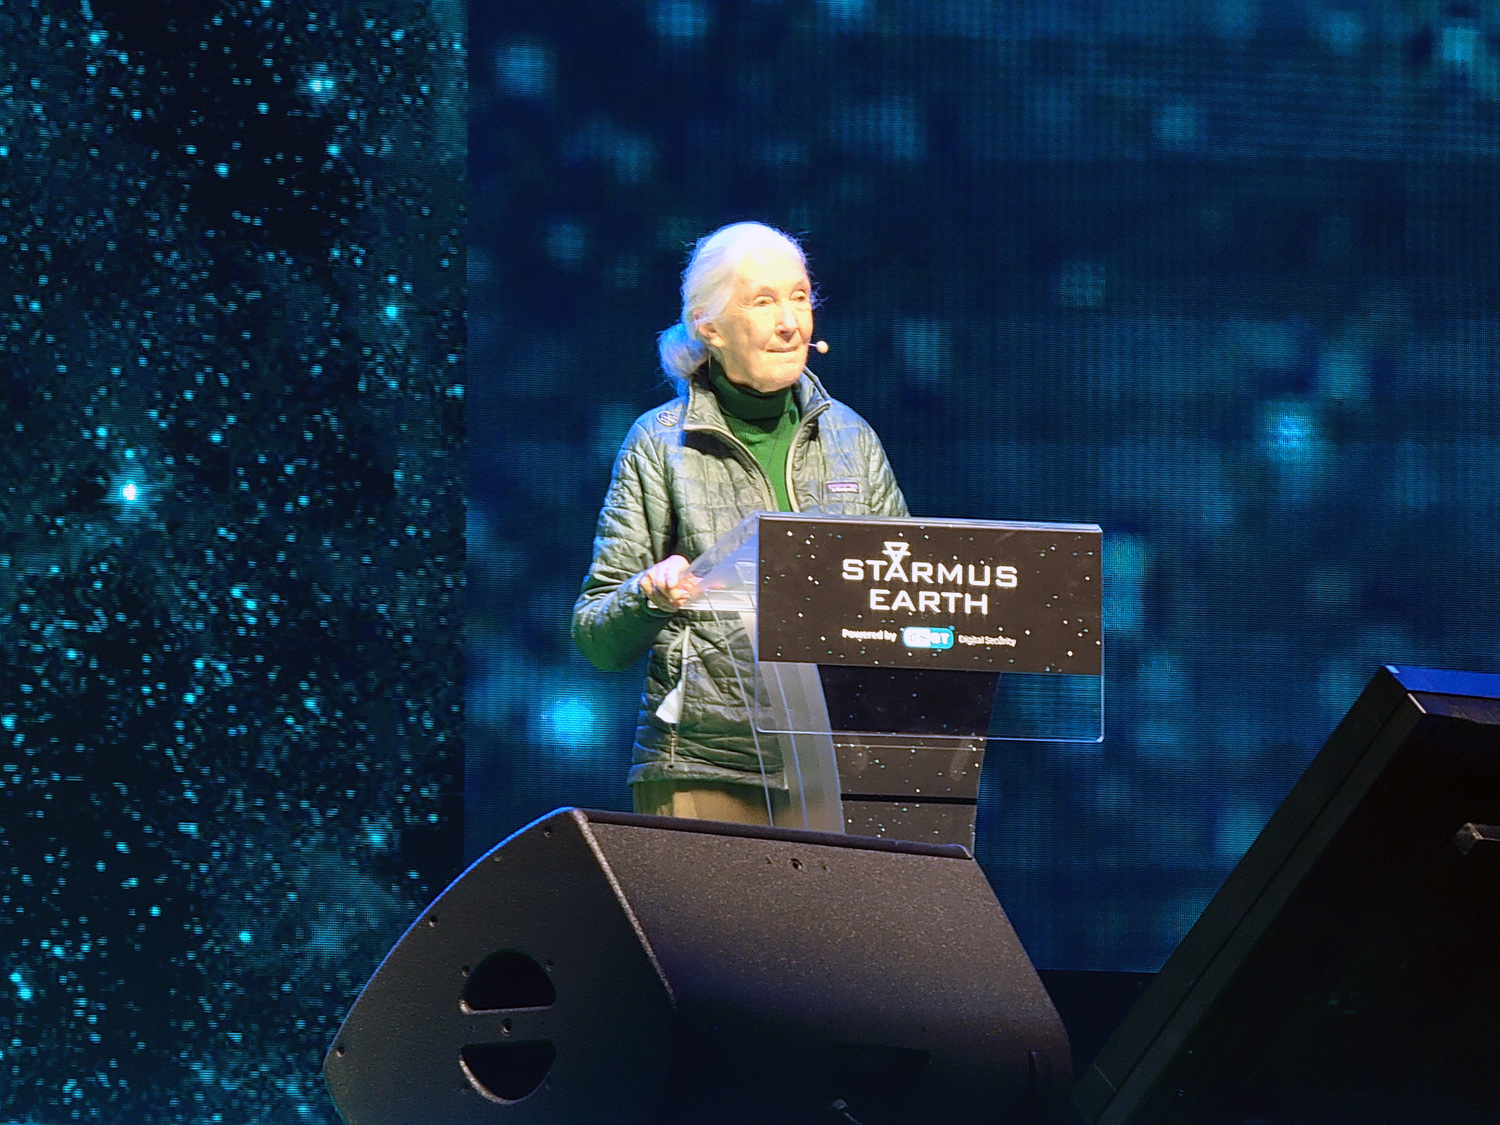 The great Jane Goodall, so well known for her research on chimpanzees, opened the festival with a talk about life on Earth and our planet’s future. Credit: David J. Eicher.